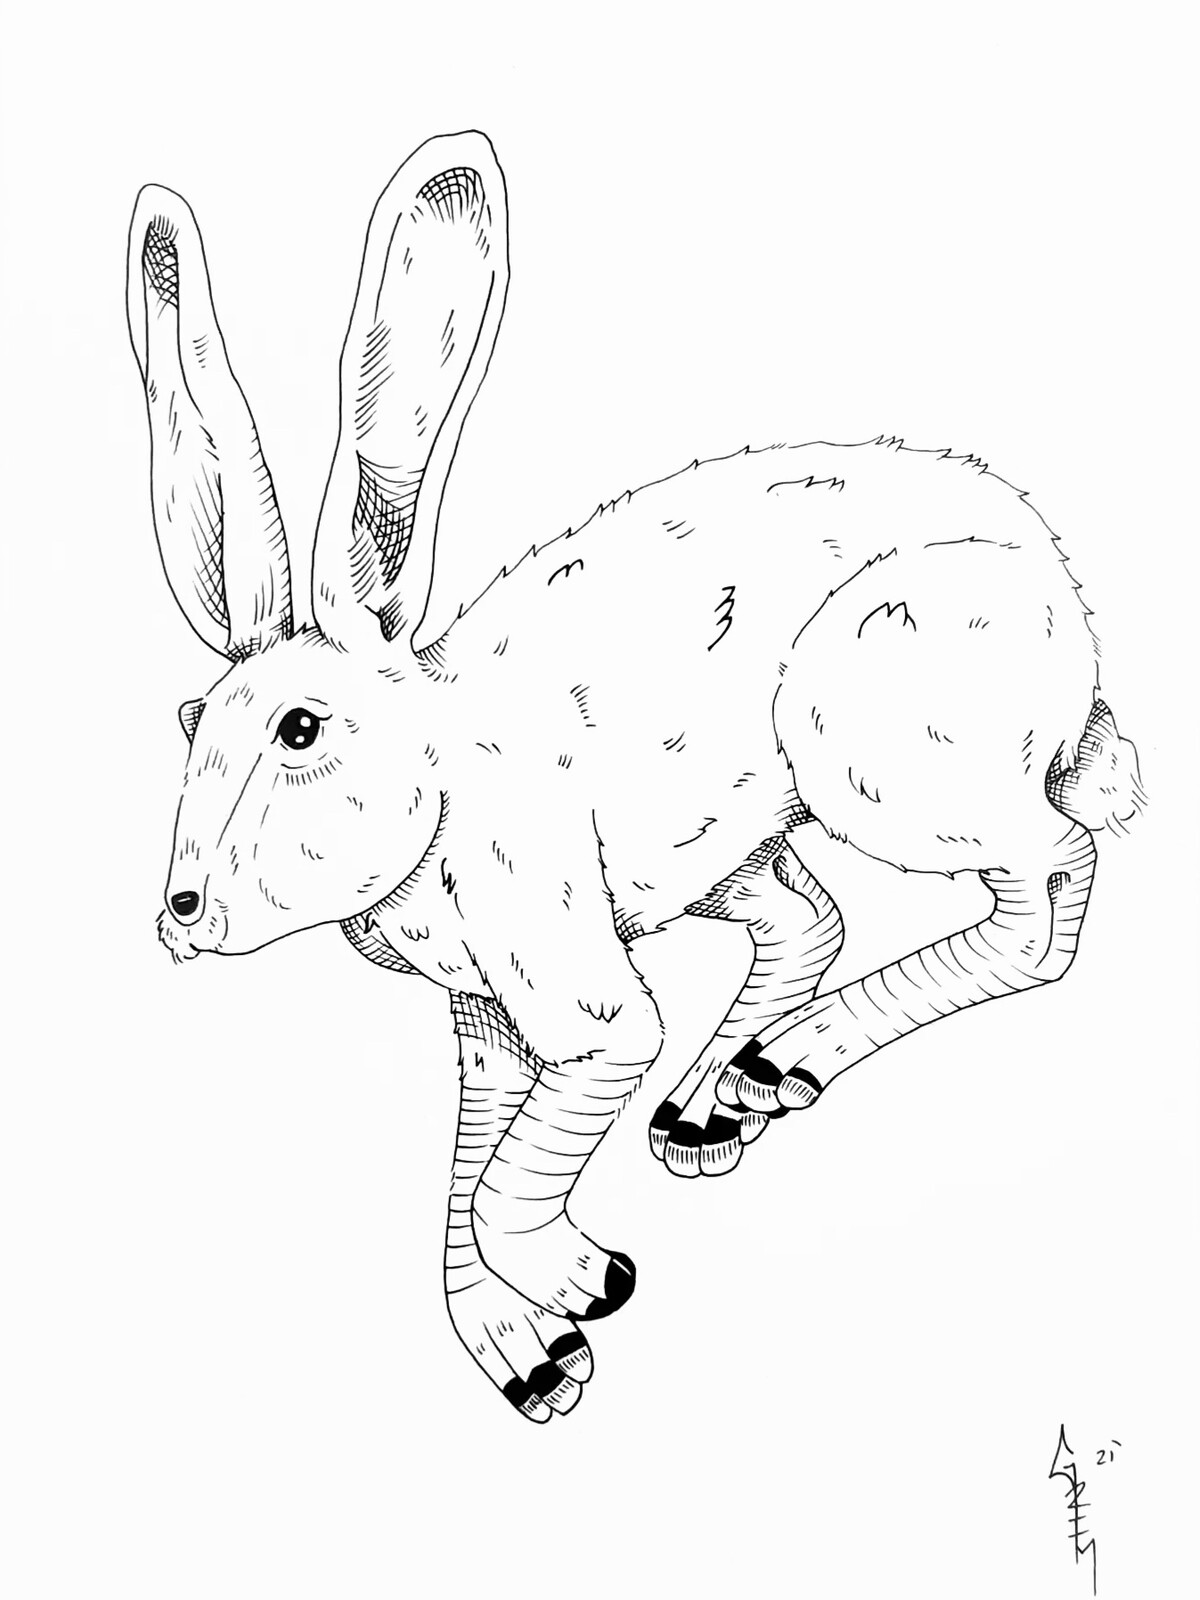 Grim Stance - The Hare